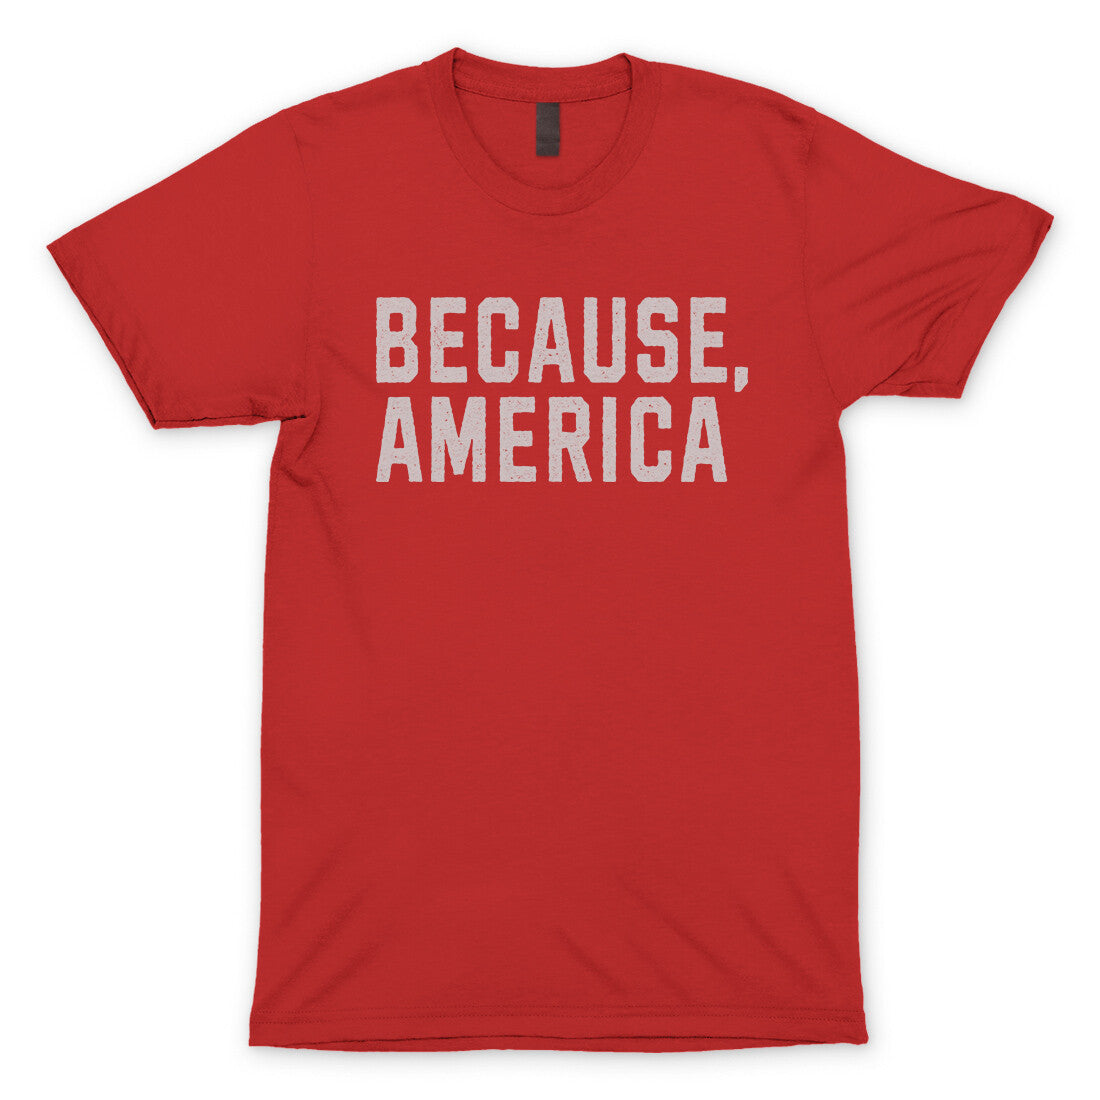 Because America in Red Color